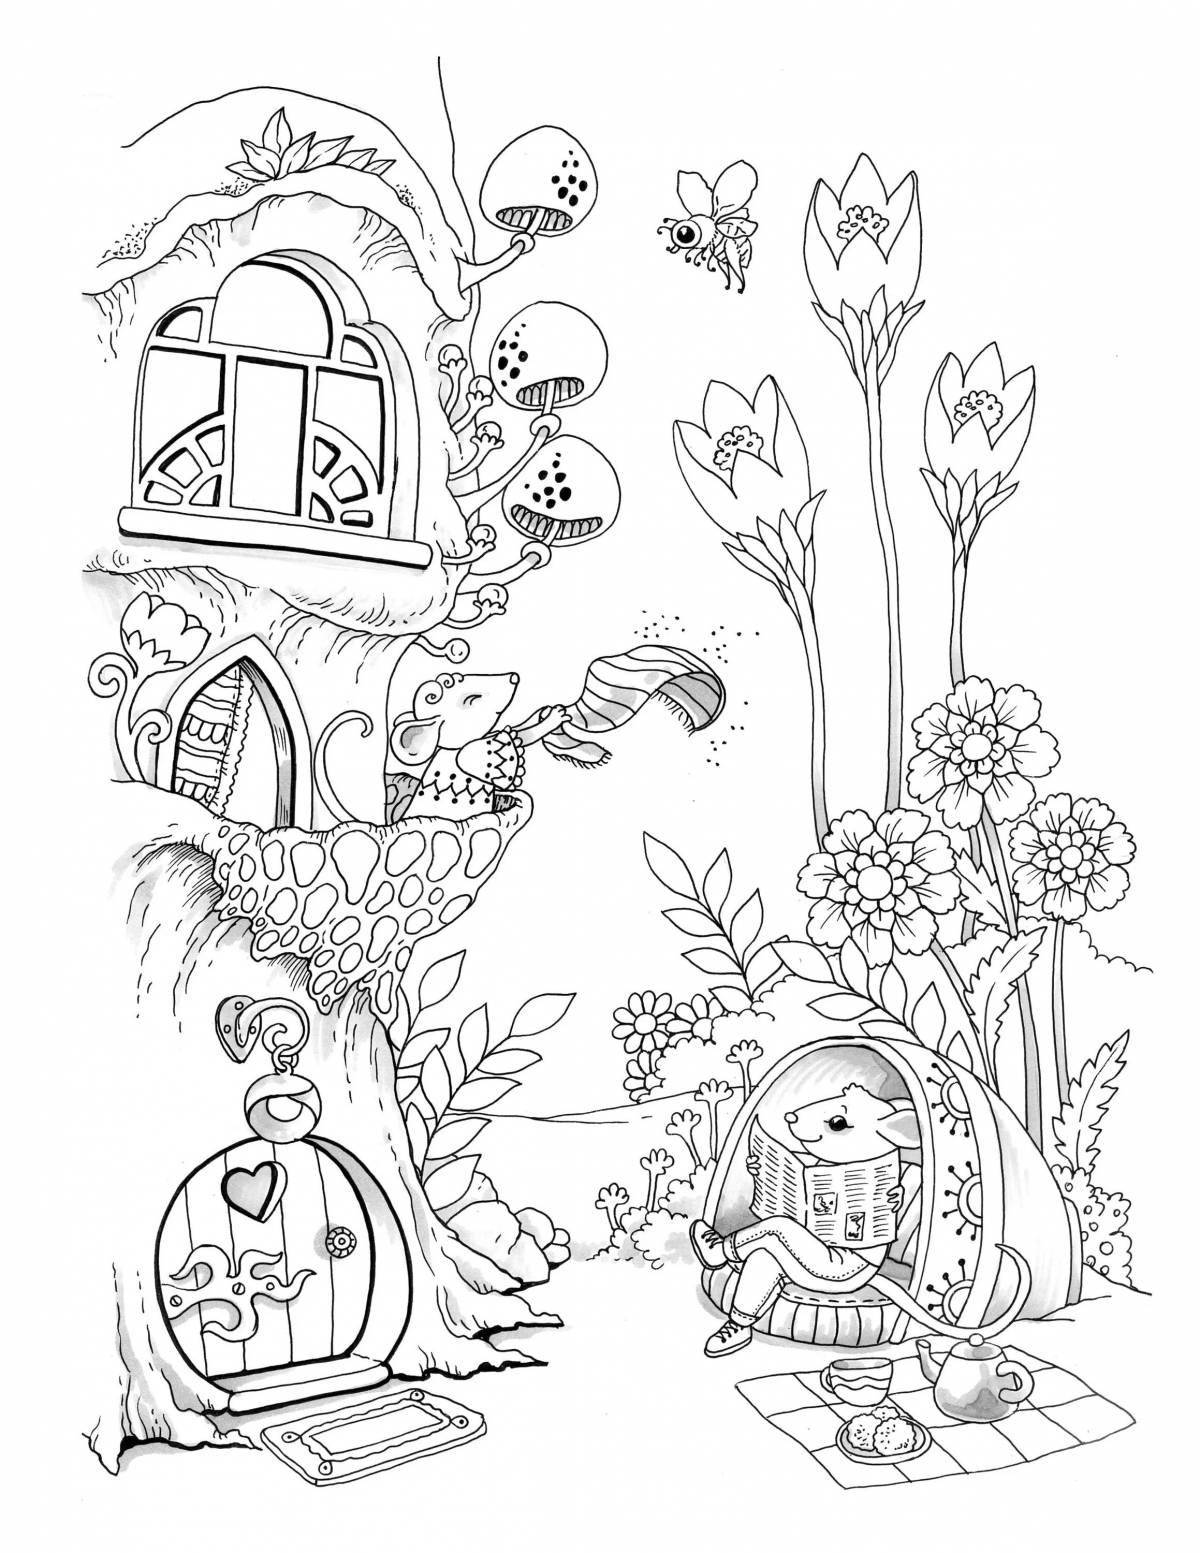 Coloring page amazing houses and flowers